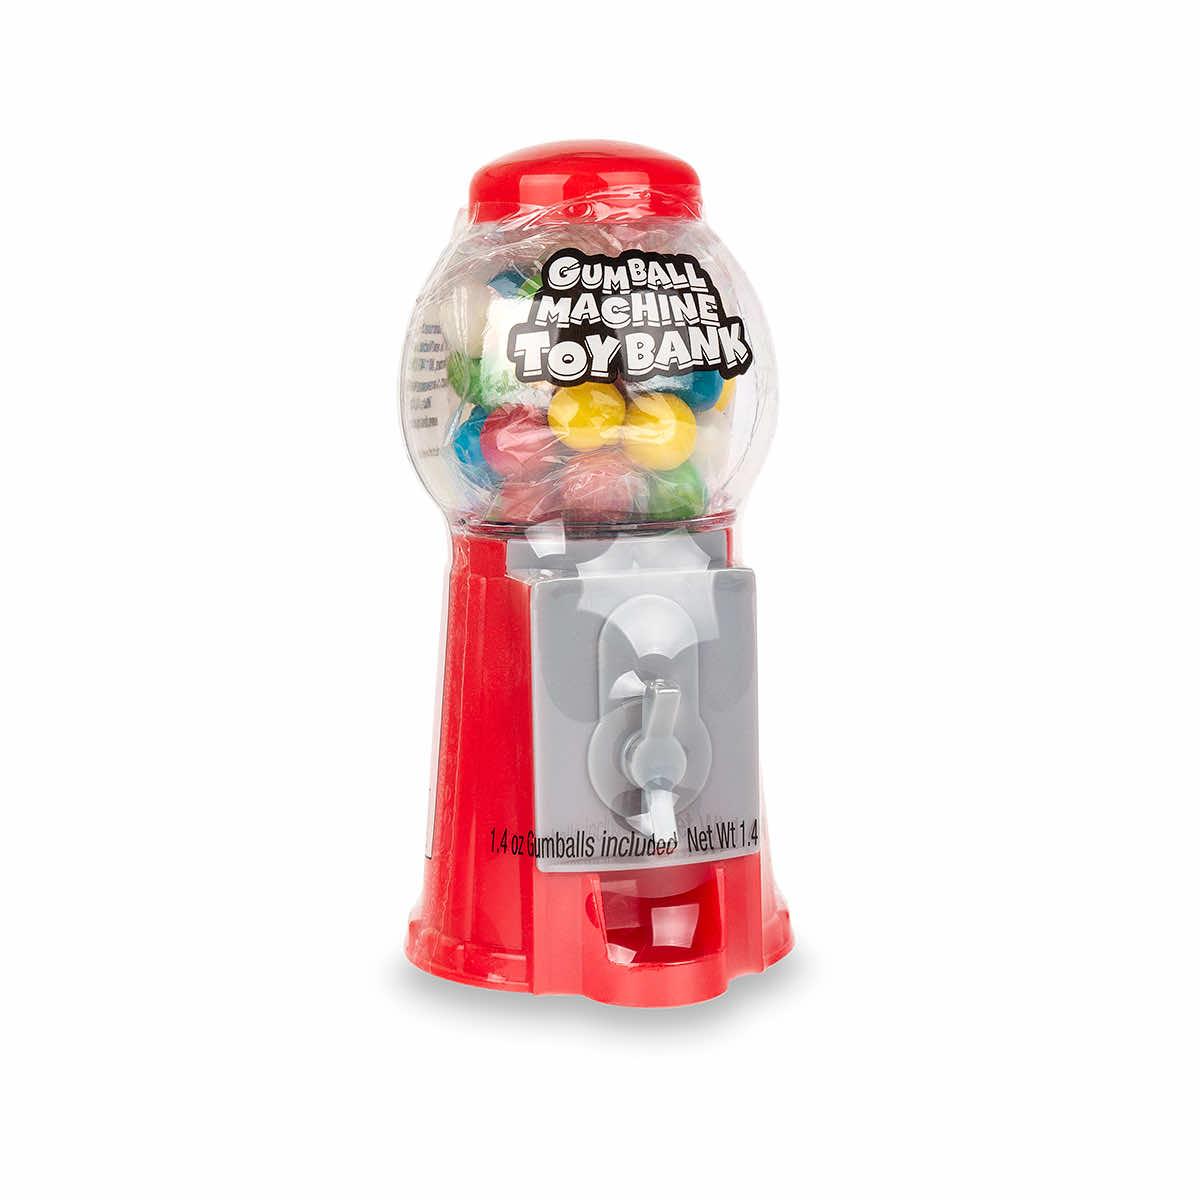  Gumball Toy Bank Candy Machine